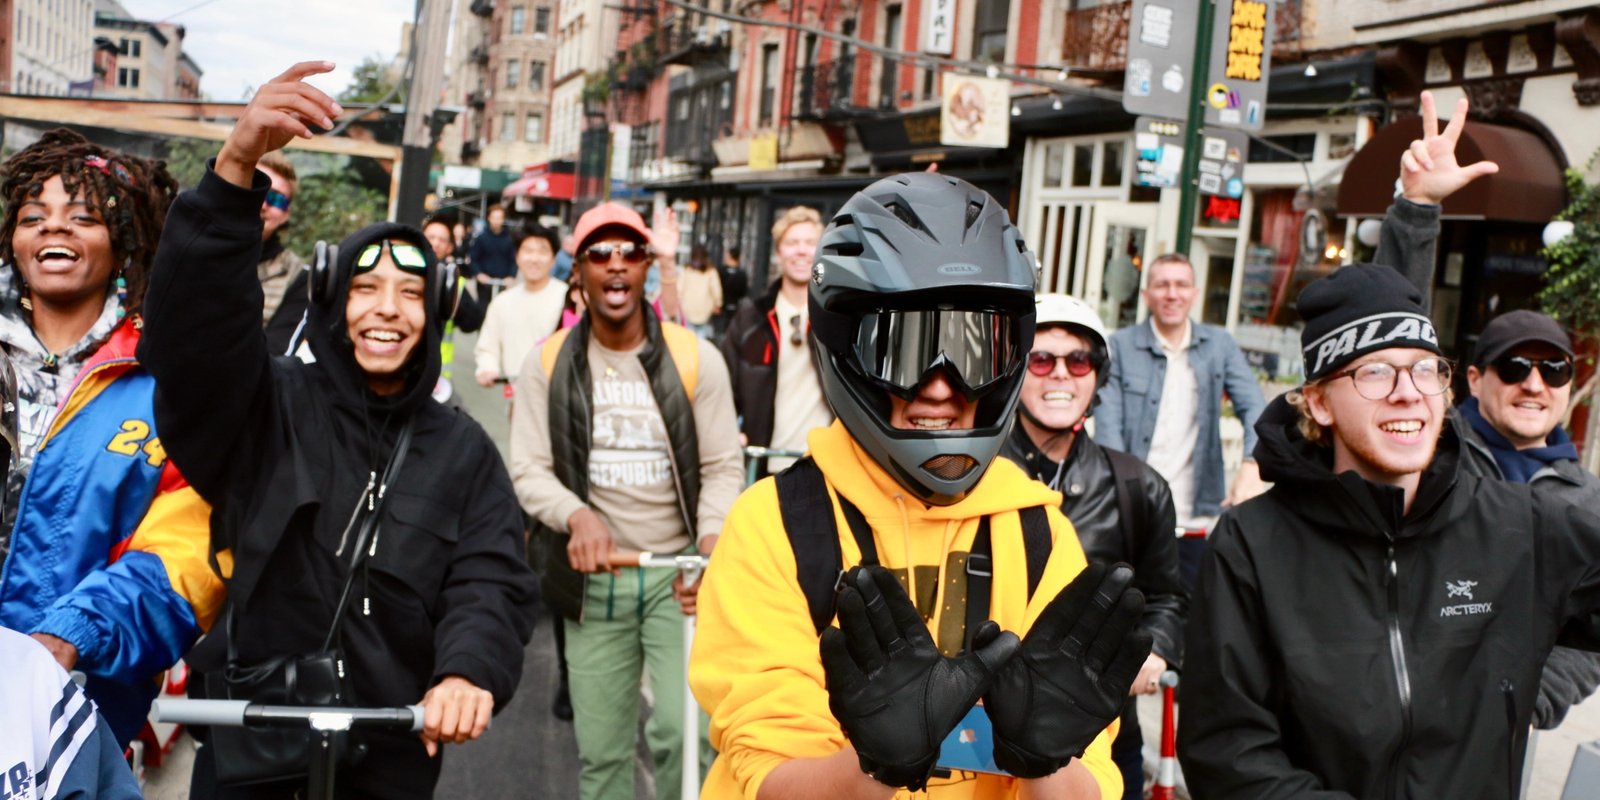 Unagi's Electric Sunday: A Ride Through NYC Like No Other!